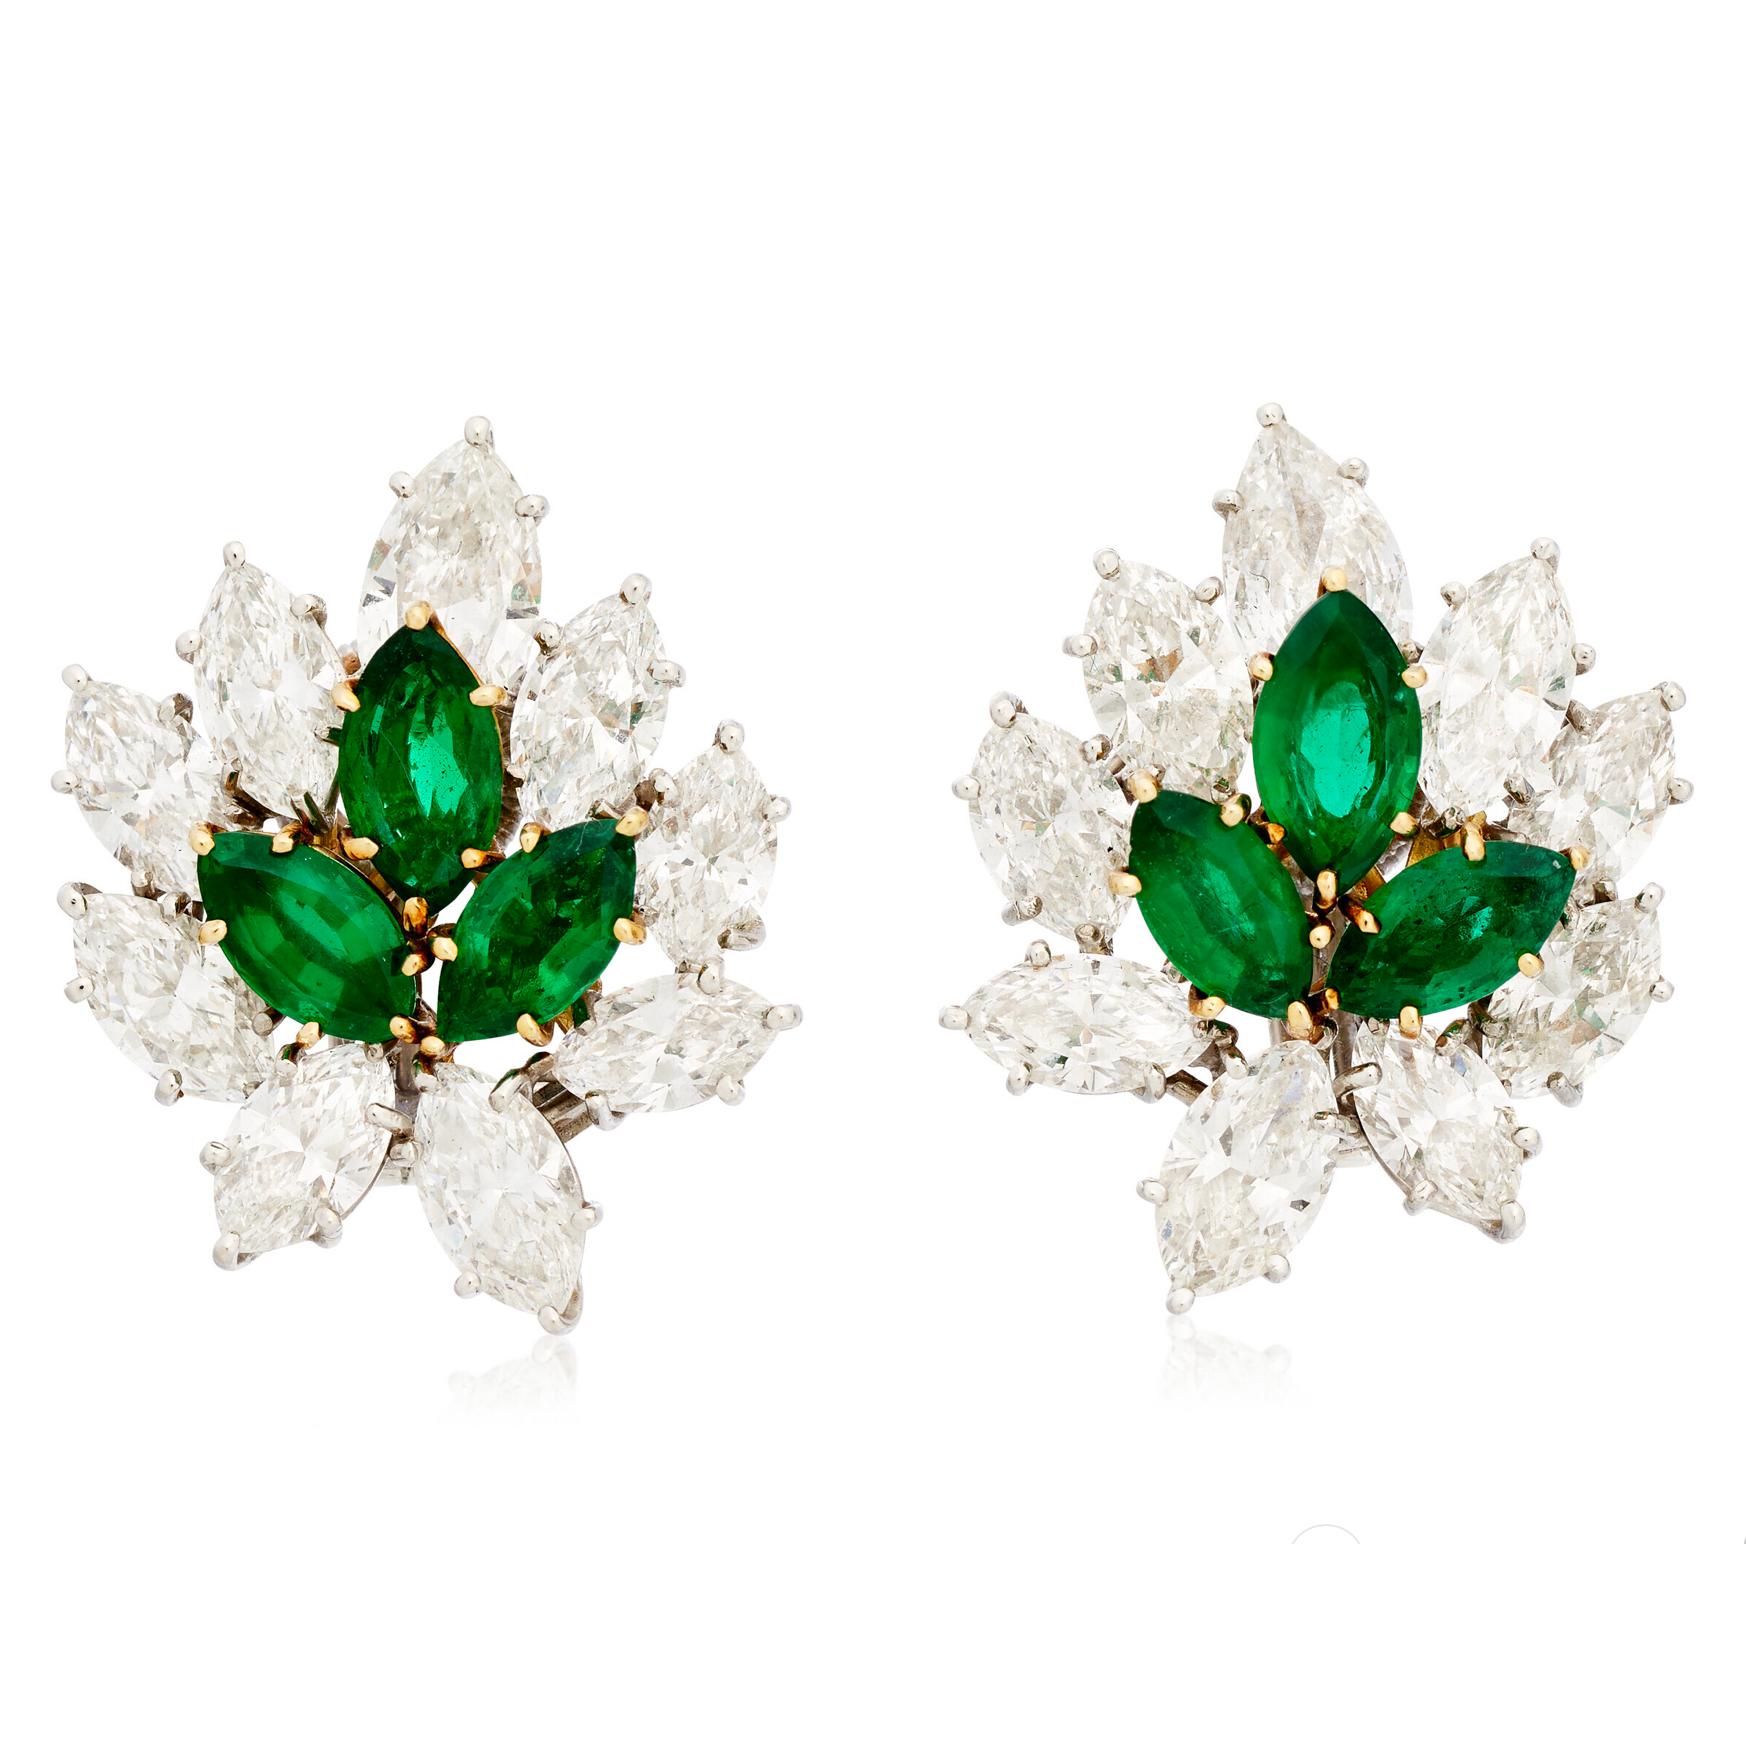 Marquise-cut emeralds, marquise and pear-shaped diamonds, platinum and 18k yellow gold,
maker's mark (Jacques Timey), black Harry Winston pouch Harry Winston,
 Emeralds: 6 marquise-cut with a total weight of 3.78 carats Diamonds: 16 marquise-cut